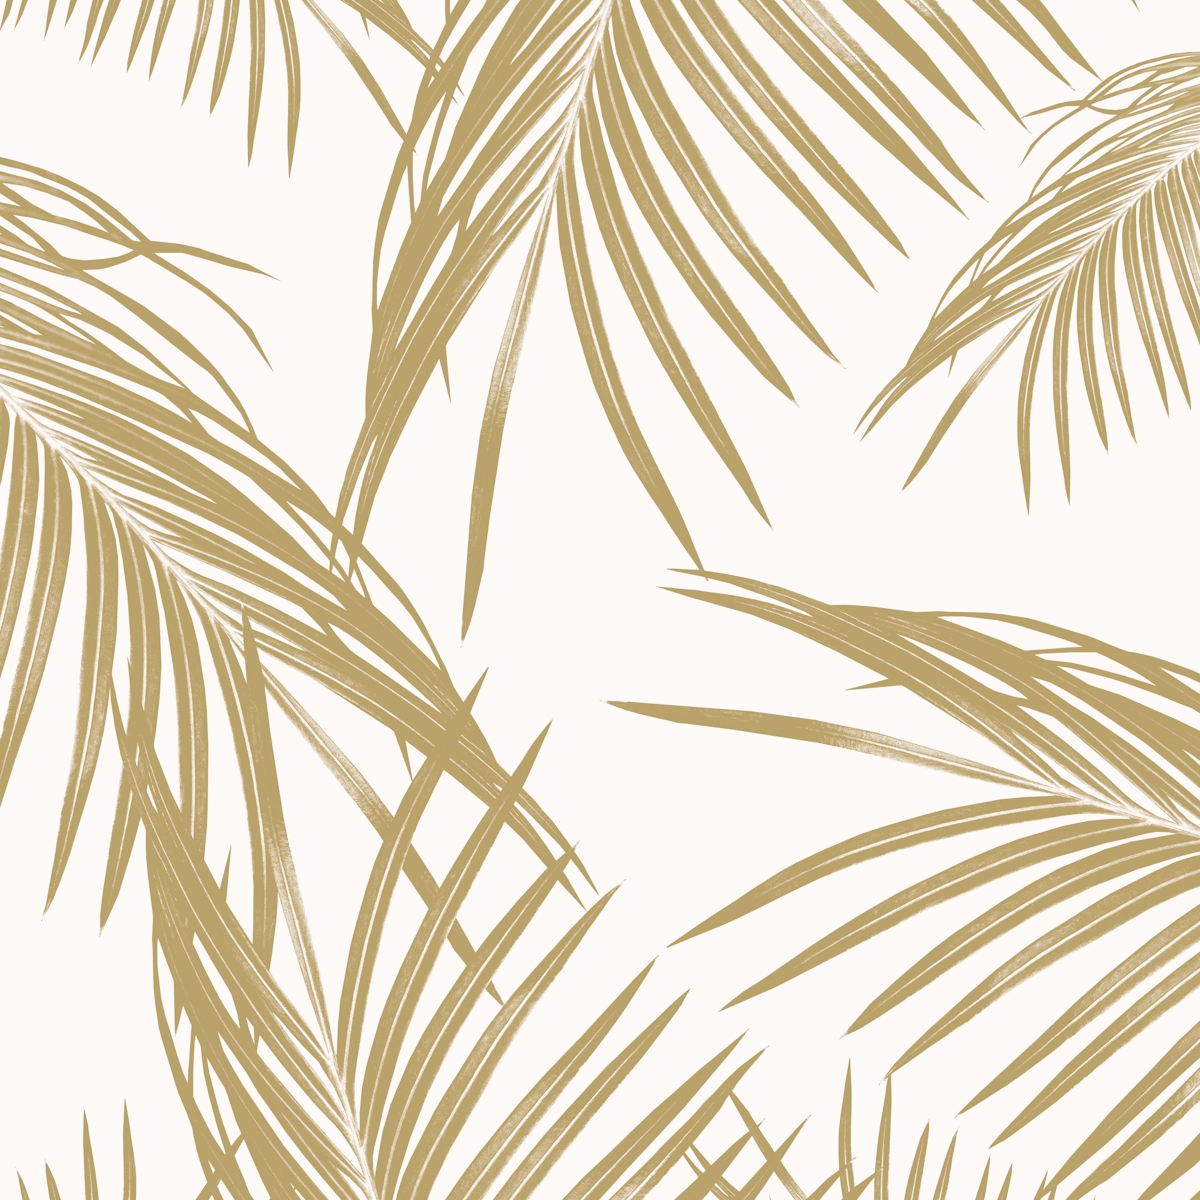 "Gold Palm Leaves Dream 1 Wallpaper | Buy Online - Happywall"